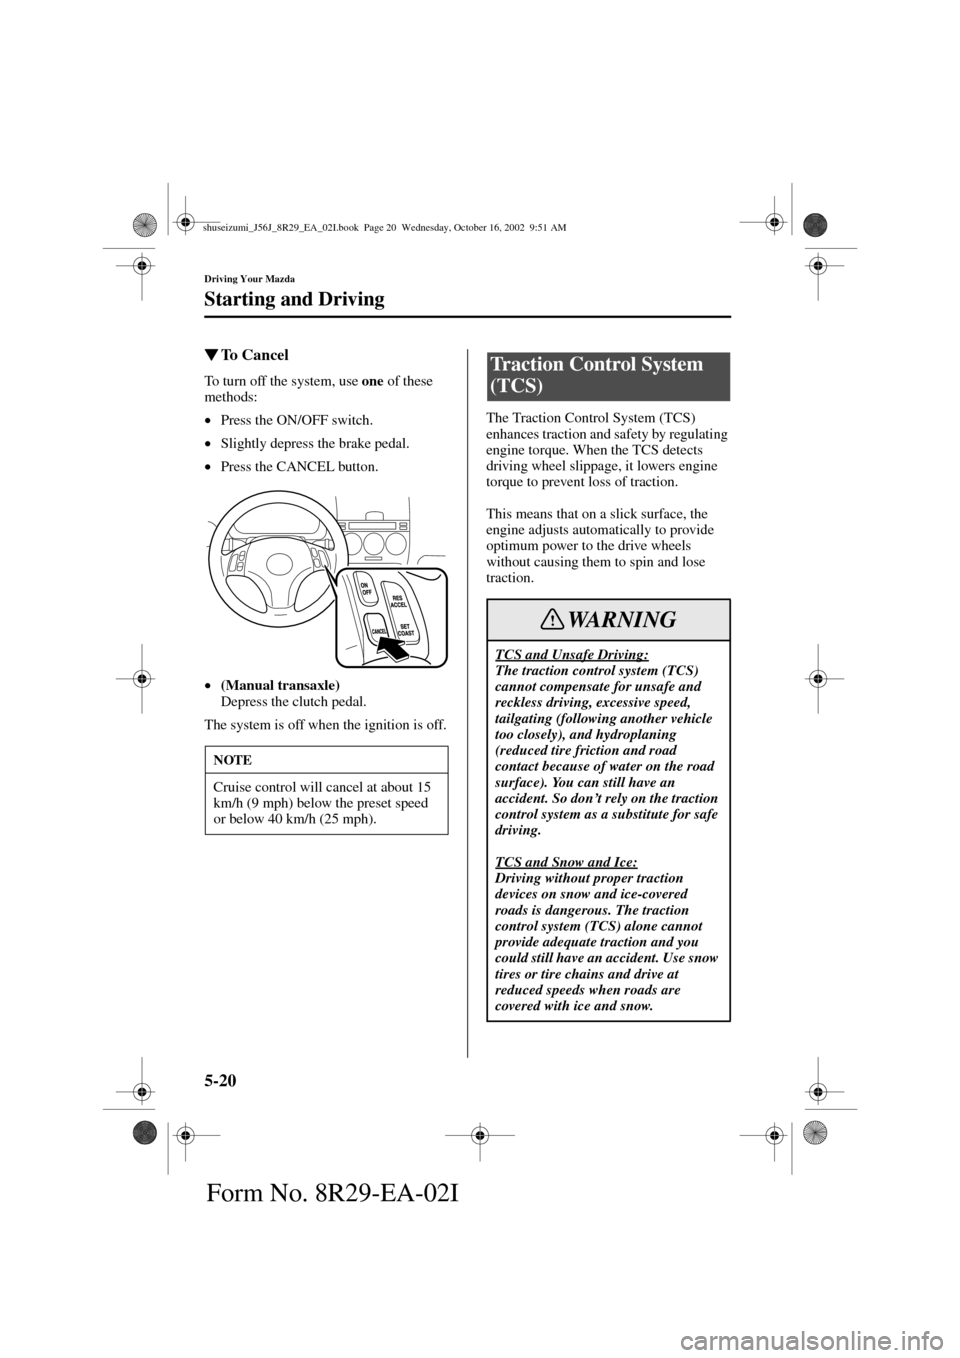 MAZDA MODEL 6 2003  Owners Manual (in English) 5-20
Driving Your Mazda
Starting and Driving
Form No. 8R29-EA-02I
To  C a n c e l
To turn off the system, use one
 of these 
methods:
•
Press the ON/OFF switch.
•
Slightly depress the brake pedal